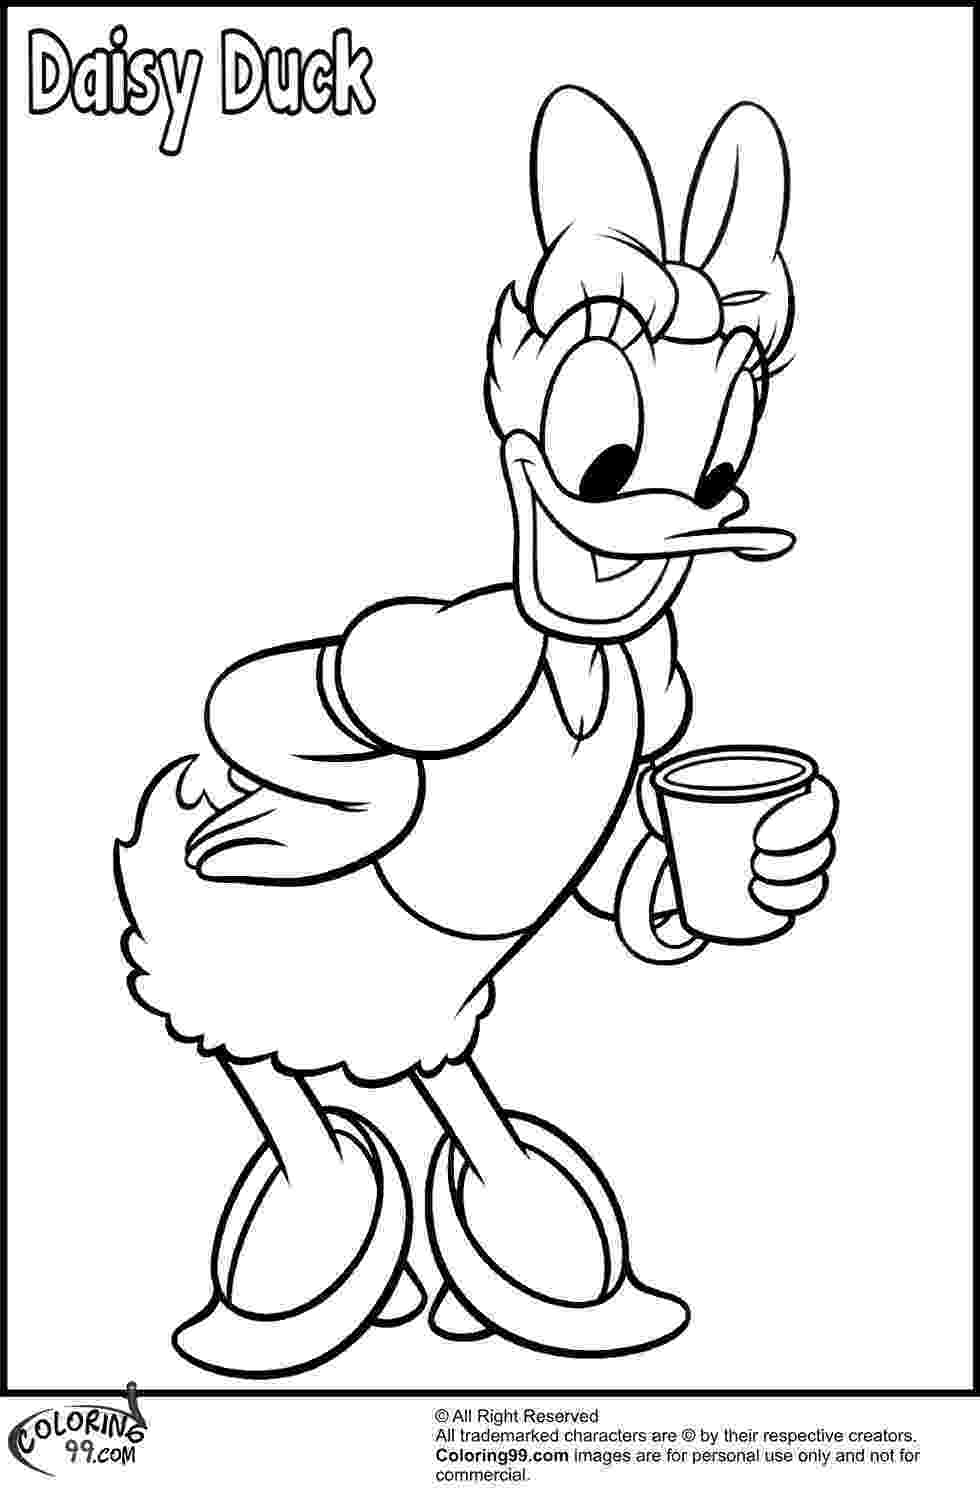 daisy duck pictures daisy duck coloring pages team colors duck daisy pictures 1 1